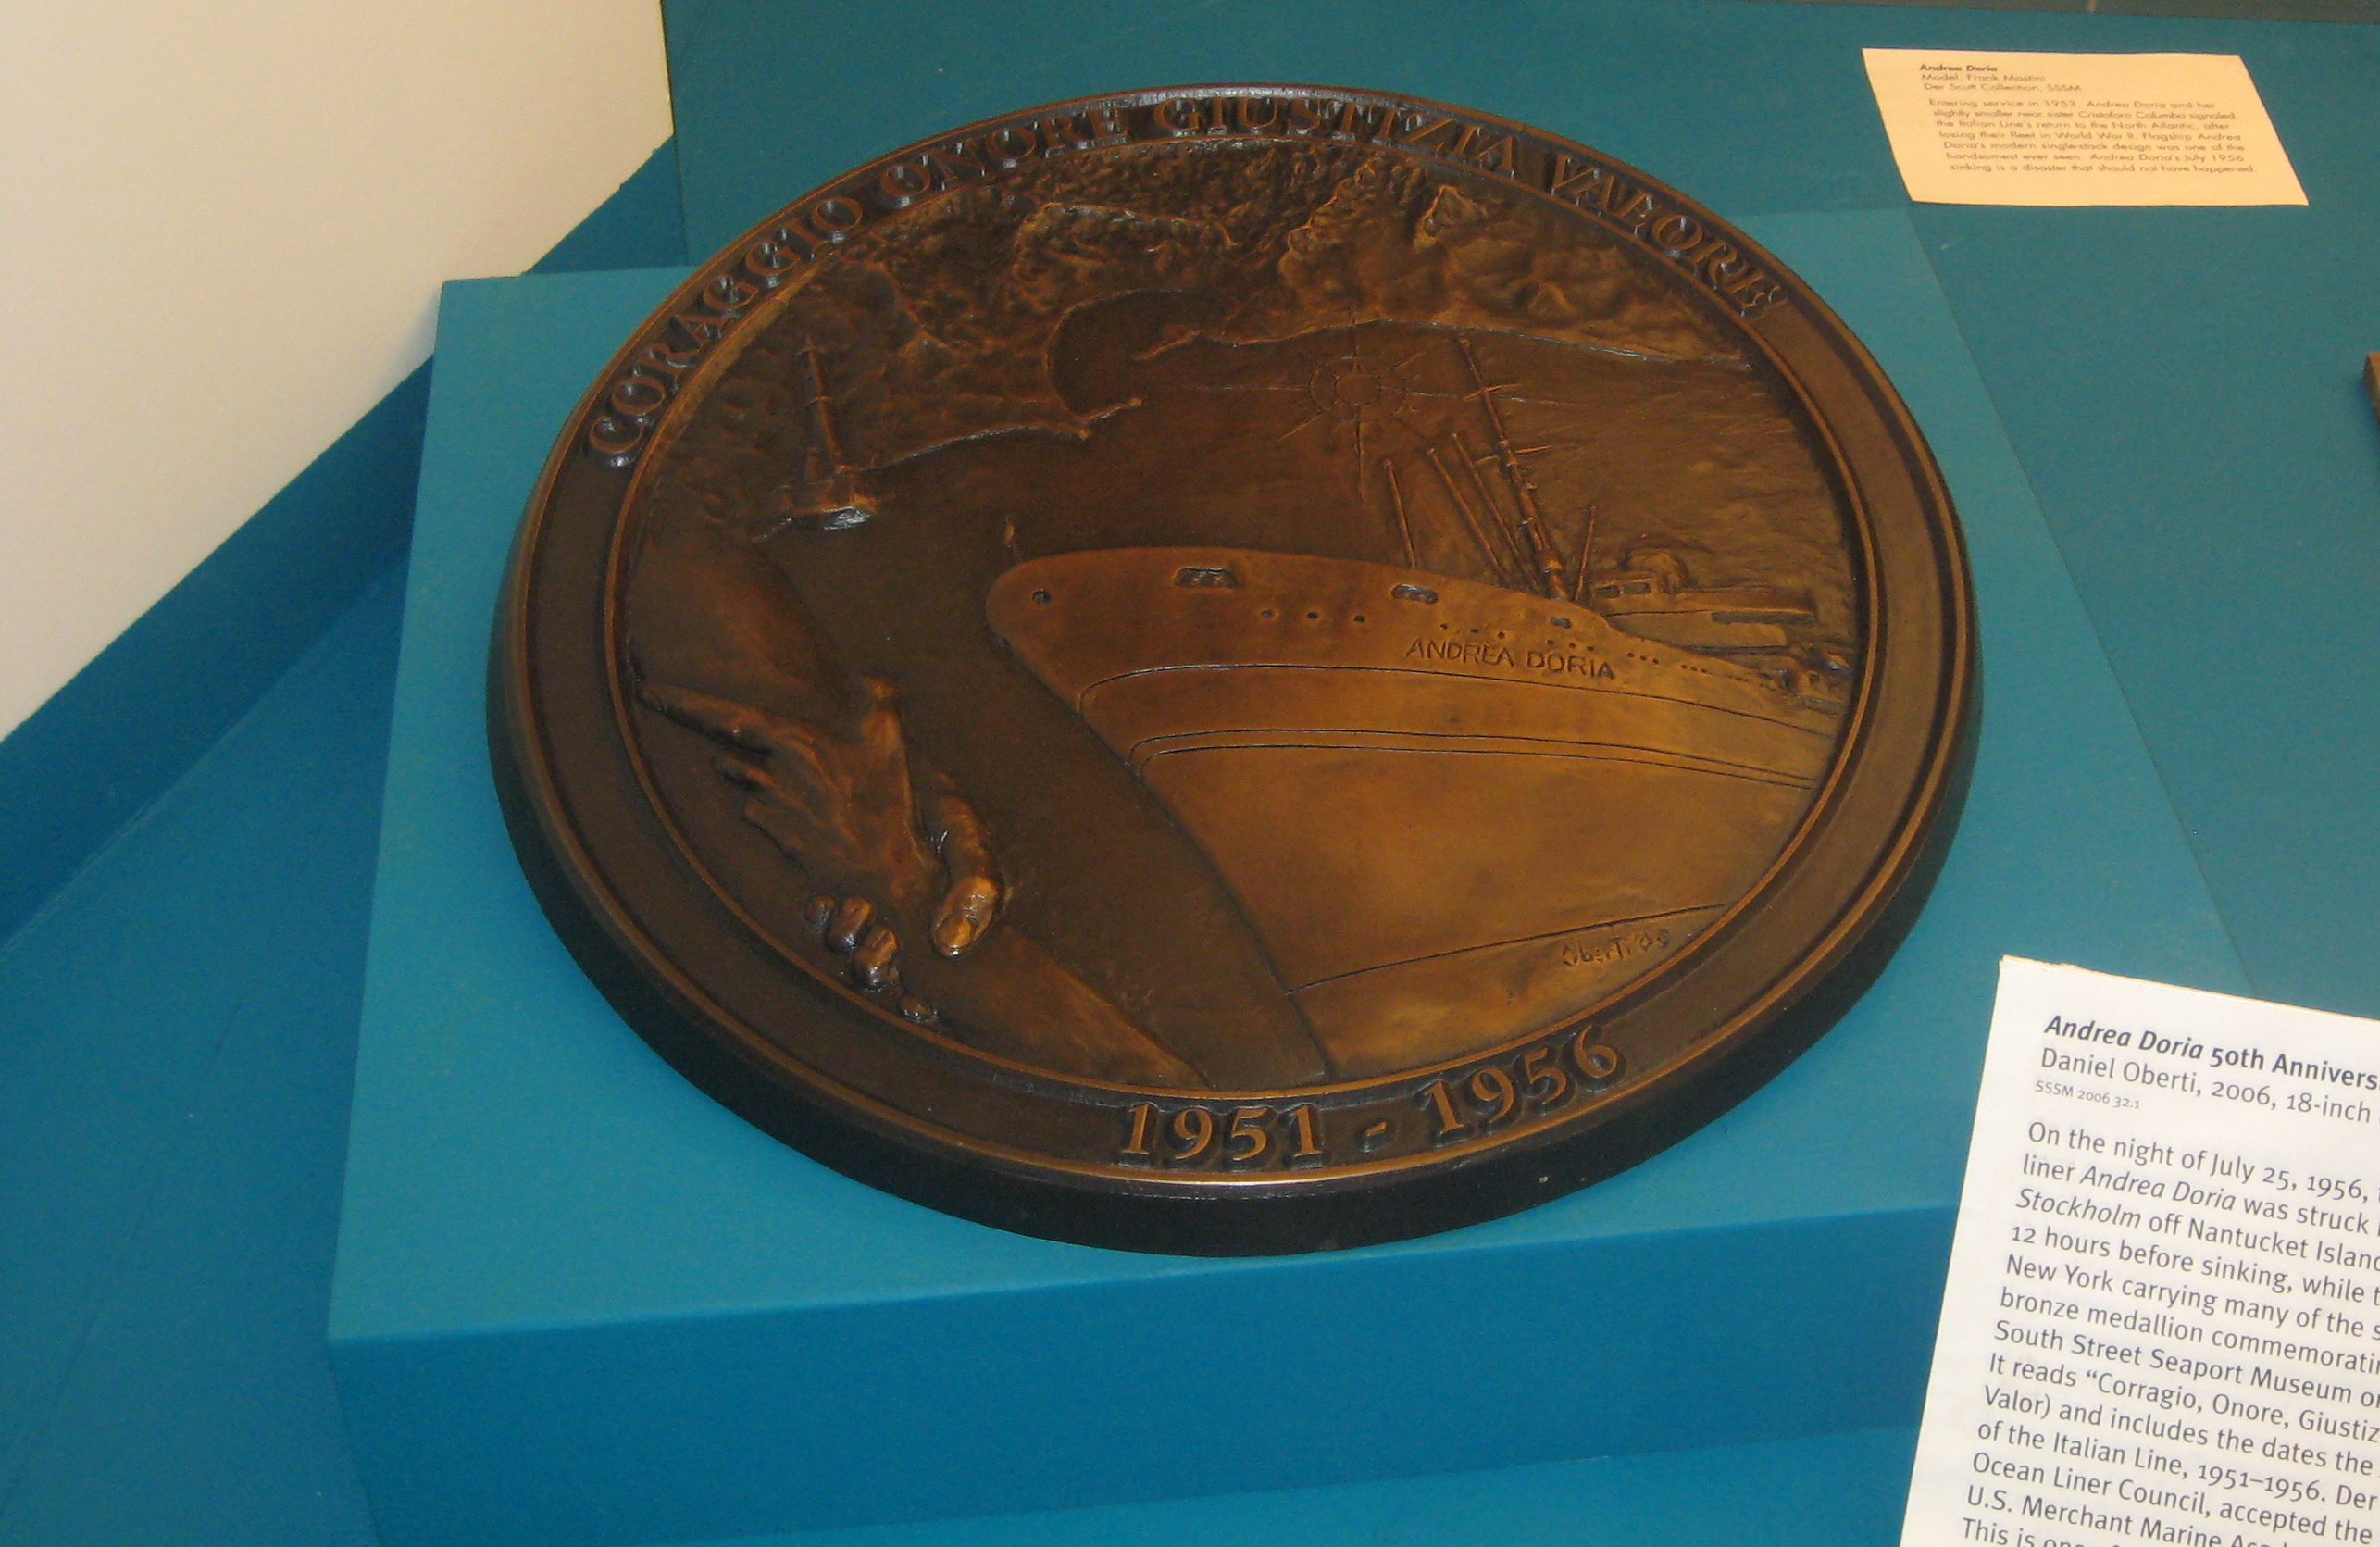 NYC - South Street Seaport Museum - Andrea Doria 50th Anniversary Medallion Andrea Doria 50th Anniversary Medallion Daniel Oberti, 2006, 18-unch diameter, bronze SSSM 2006 32.1 On the night of July 25, 1956, the New York-bound Italian ocean liner Andrea Doria was struck by the Europe-bound Swedish liner Stockholm off Nantucket Island. The Doria remained afloat for 12 hours before sinking, while the Stockholm was able to return to New York carrying many of the survivors of the Italian ship. This bronze medallion commemorating the tragedy was presented to South Street Seaport Museum on the 50th anniversary of the sinking. It reads "Corragio, Onore, Giustizia, Valore" (Courage, Honor, Justice, Valor) and includes the dates the Andrea Doria served as the flagship of the Italian Line, 1951-1956. Der Scutt, Chairman of the Museum's Ocean Liner Council, accepted the medallion at a ceremony held at the U.S. Merchant Marine Academy in Kings Point, NY on July 23, 2006. This is one of two identical medallions; the second is in the collection of the Galata Museo del Mare in Genoa, Italy. The medallions were sponsored by Jerome Reinert, Angela E. Addario and Pierette Simpson.